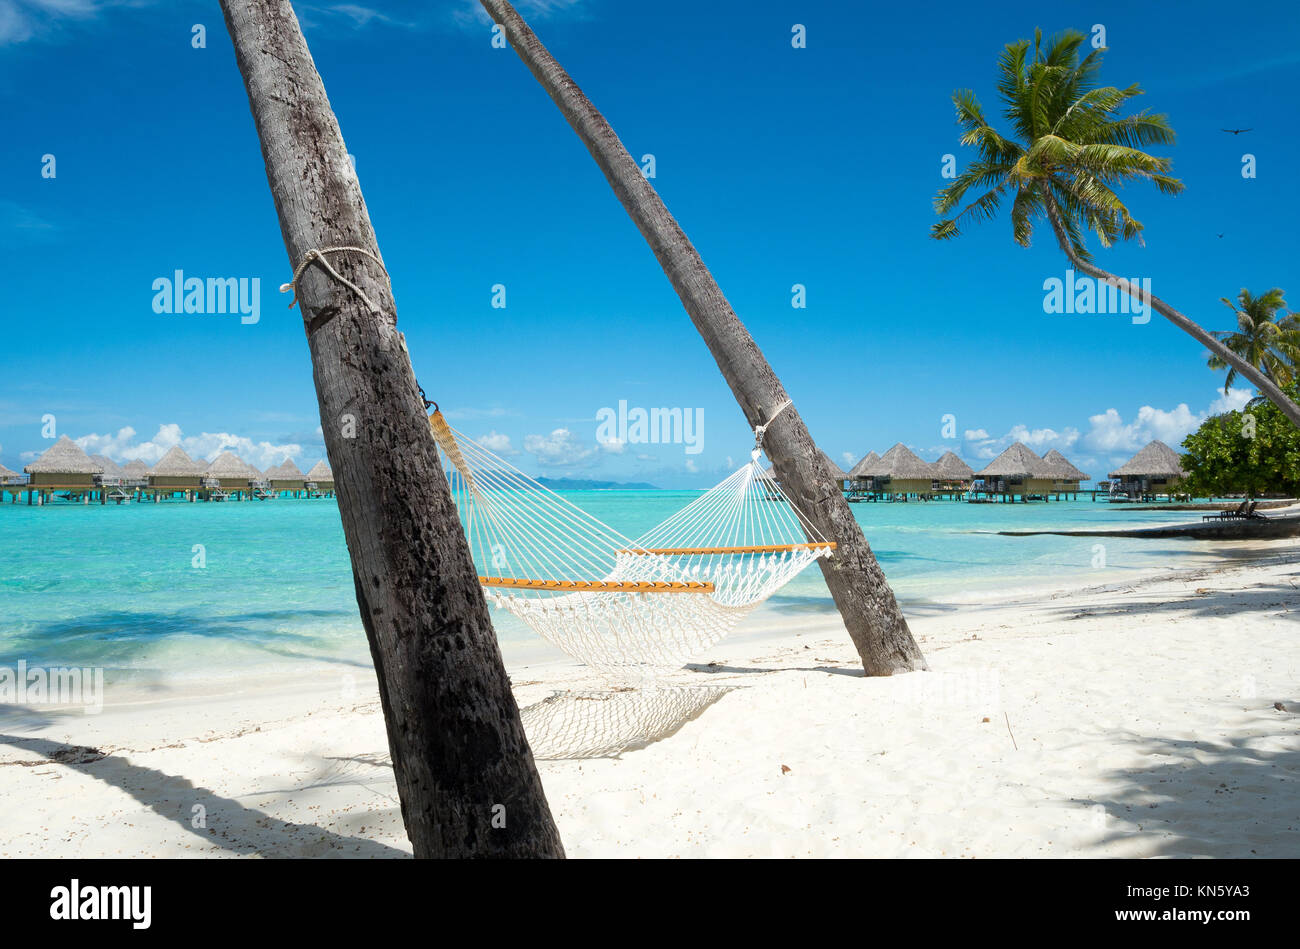 A hammock suspended between two palm trees provides ample relaxation for guests at the Intercontinental Le Moana resort in Bora Bora, French Polynesia. Stock Photo